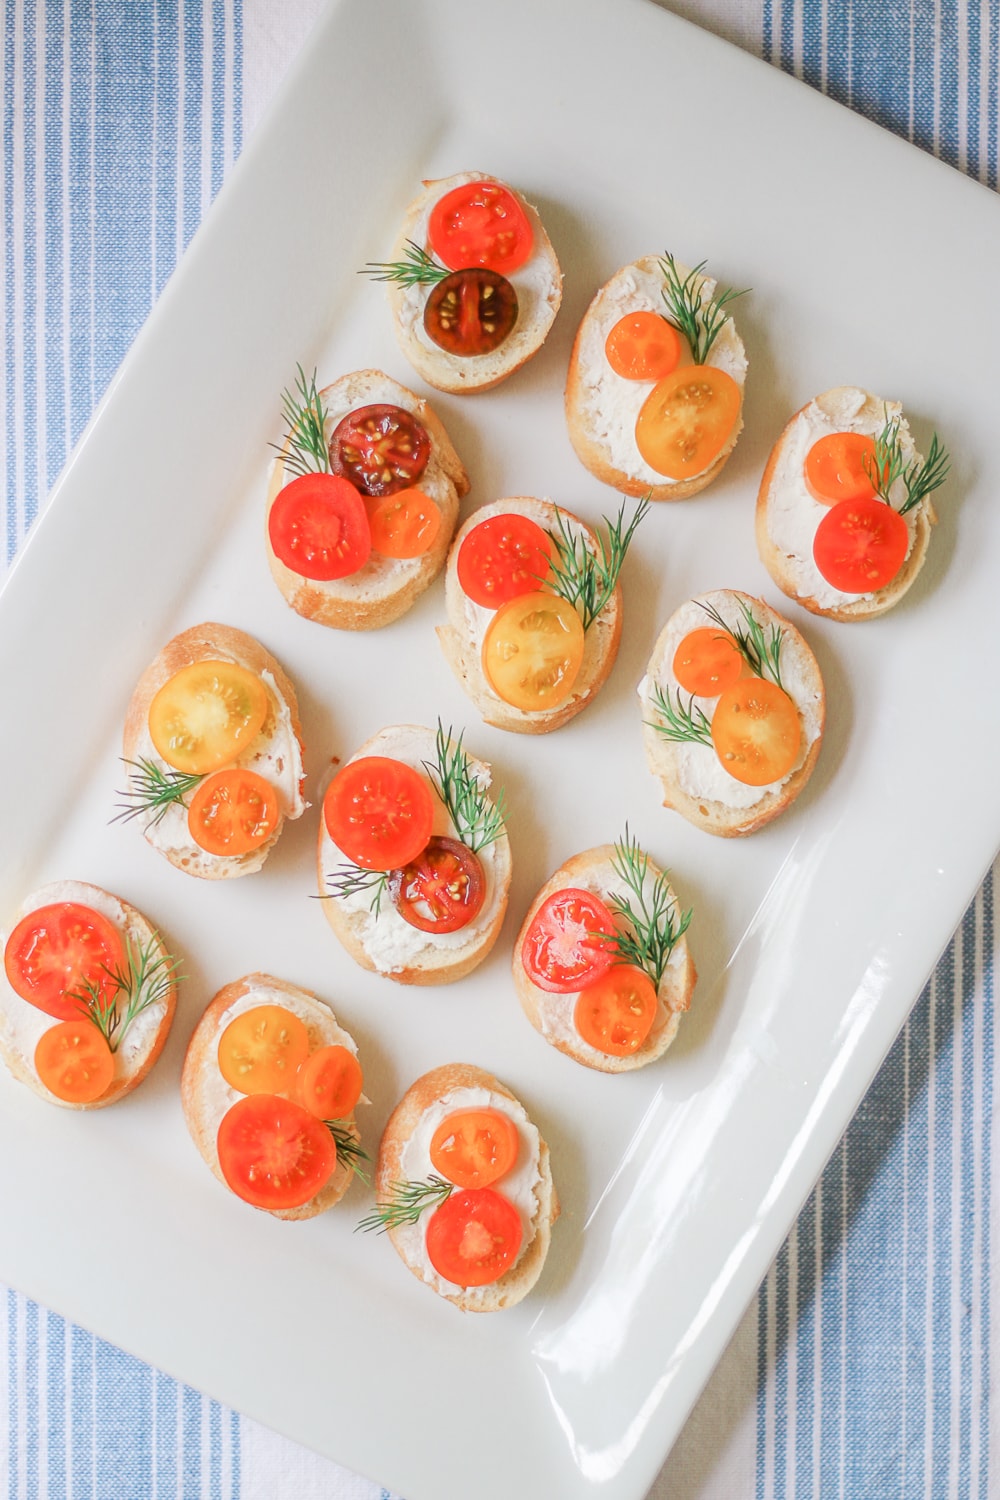 Tomato and goat cheese crostinis by southern lifestyle blogger Stephanie Ziajka of Diary of a Debutante